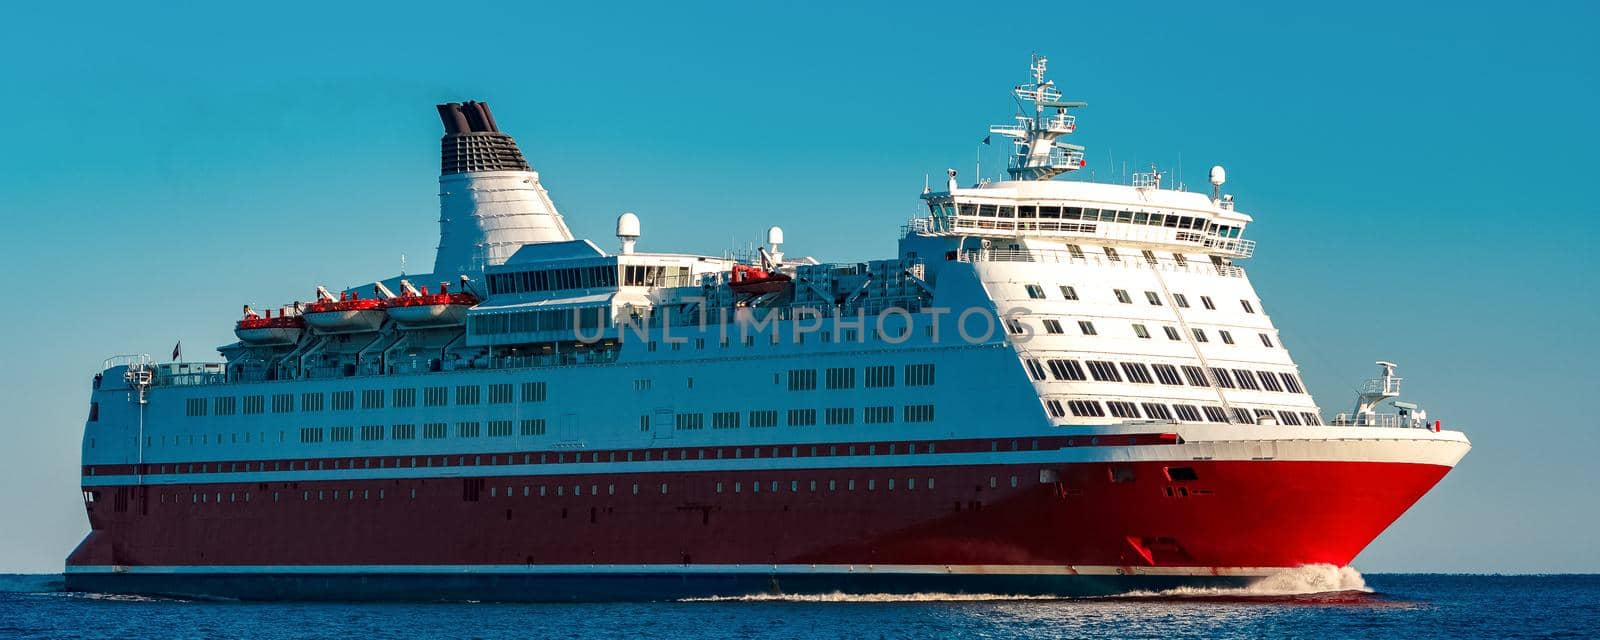 Red cruise liner by InfinitumProdux